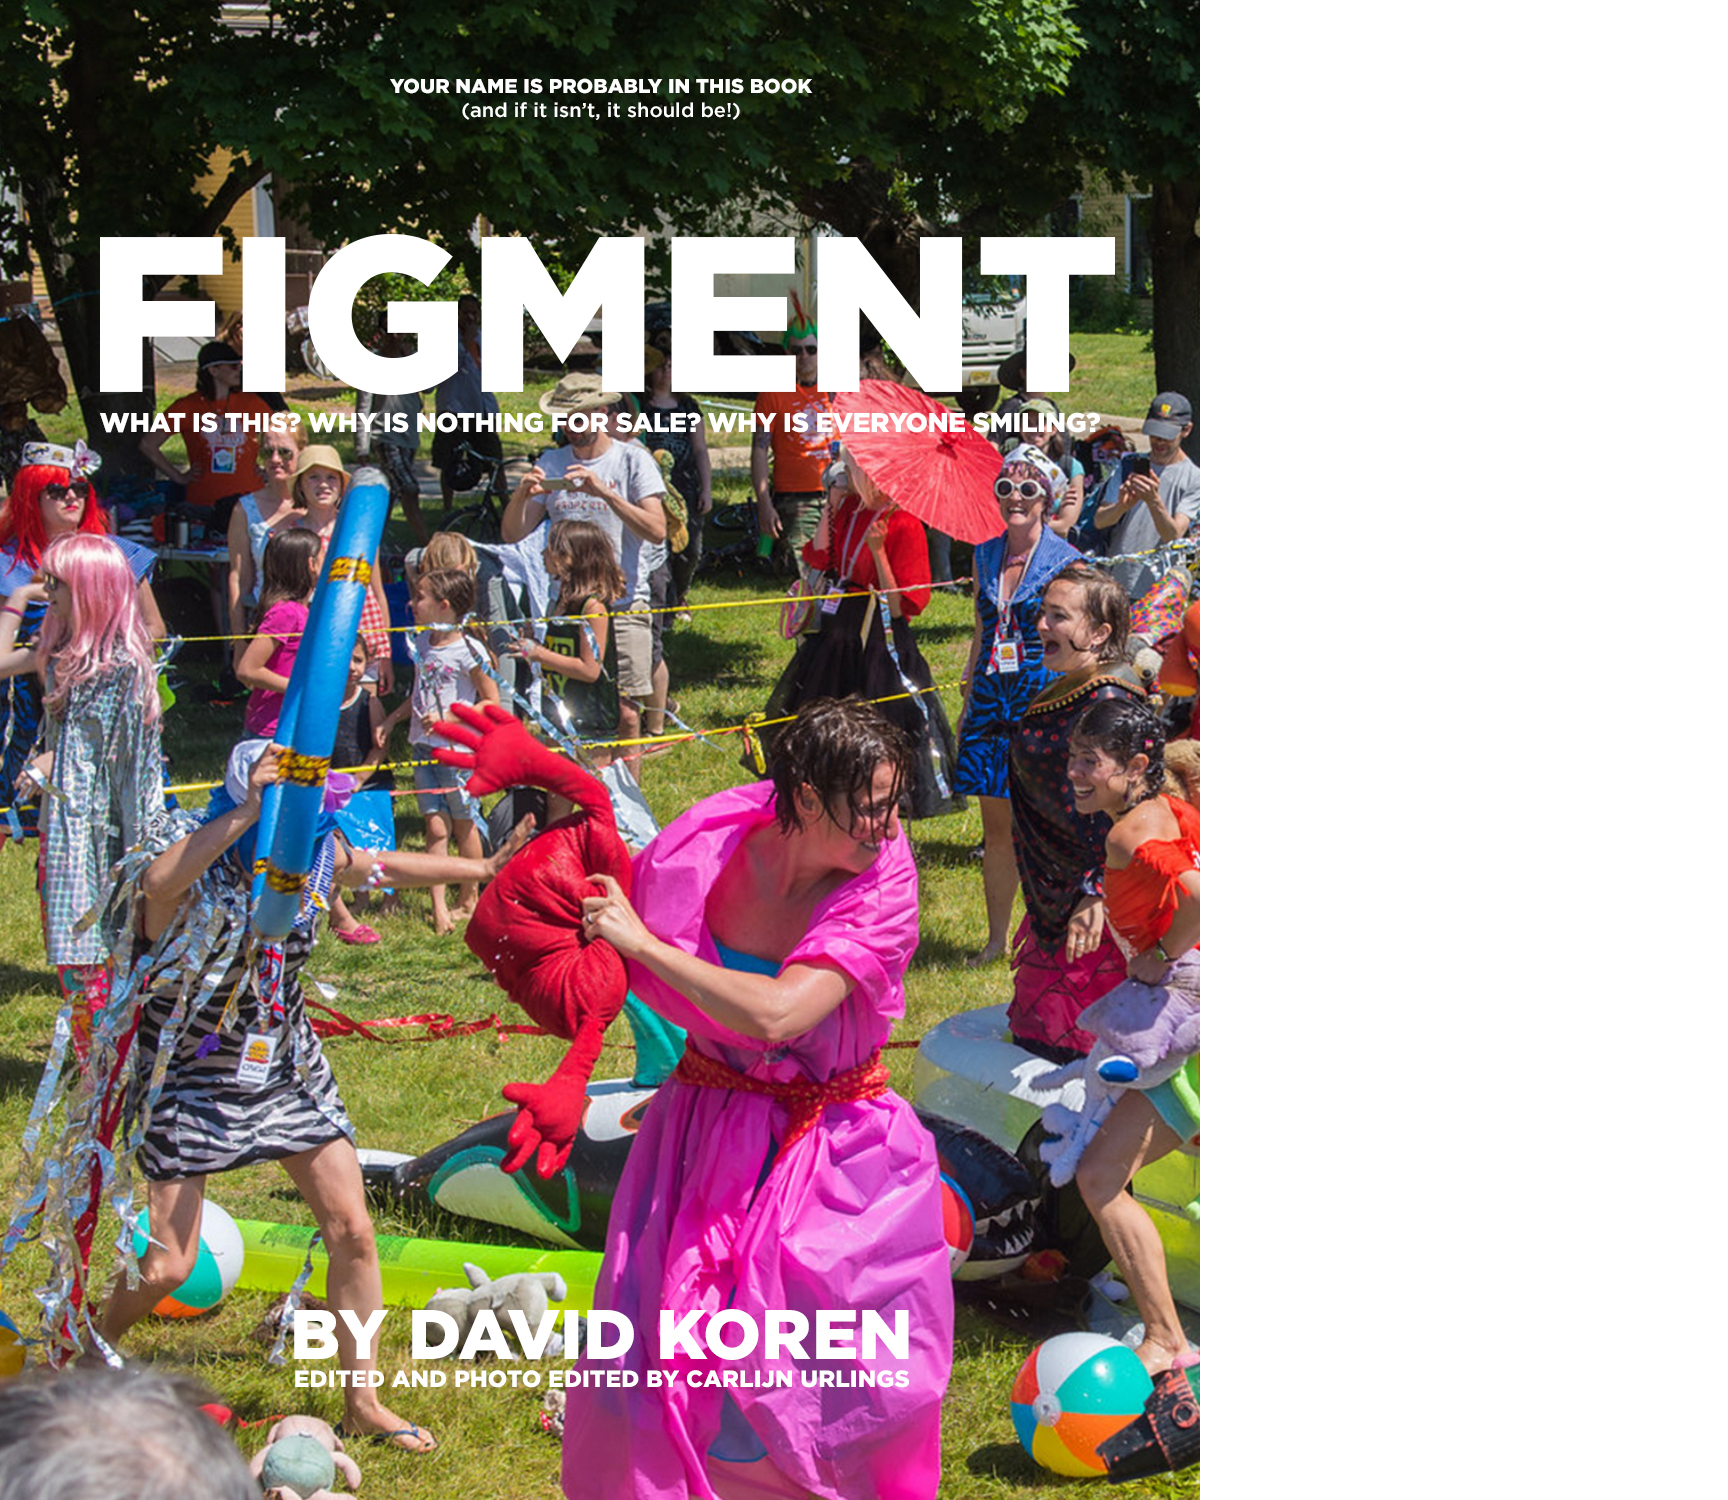 Oculus Book Review: FIGMENT: What Is This? Why Is Nothing for Sale? Why Is Everyone Smiling?